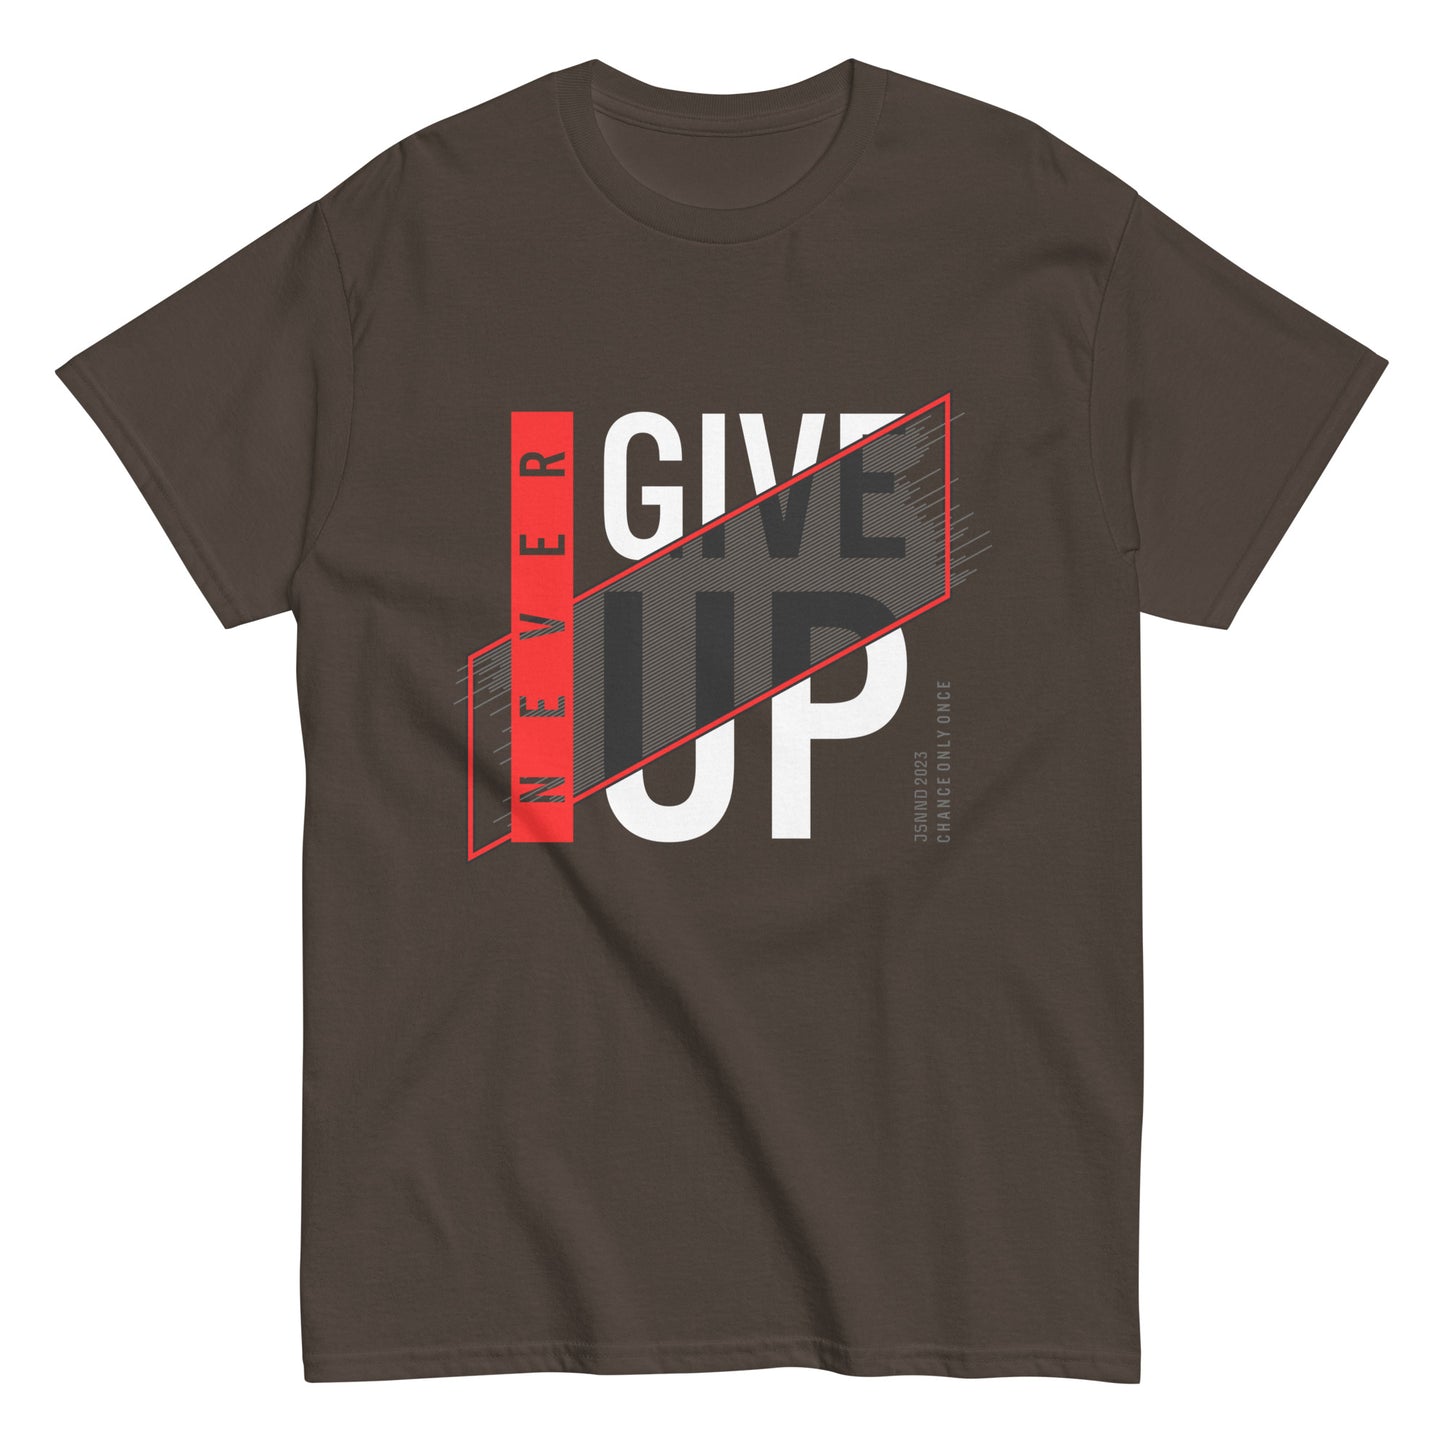 Never give up classic tee